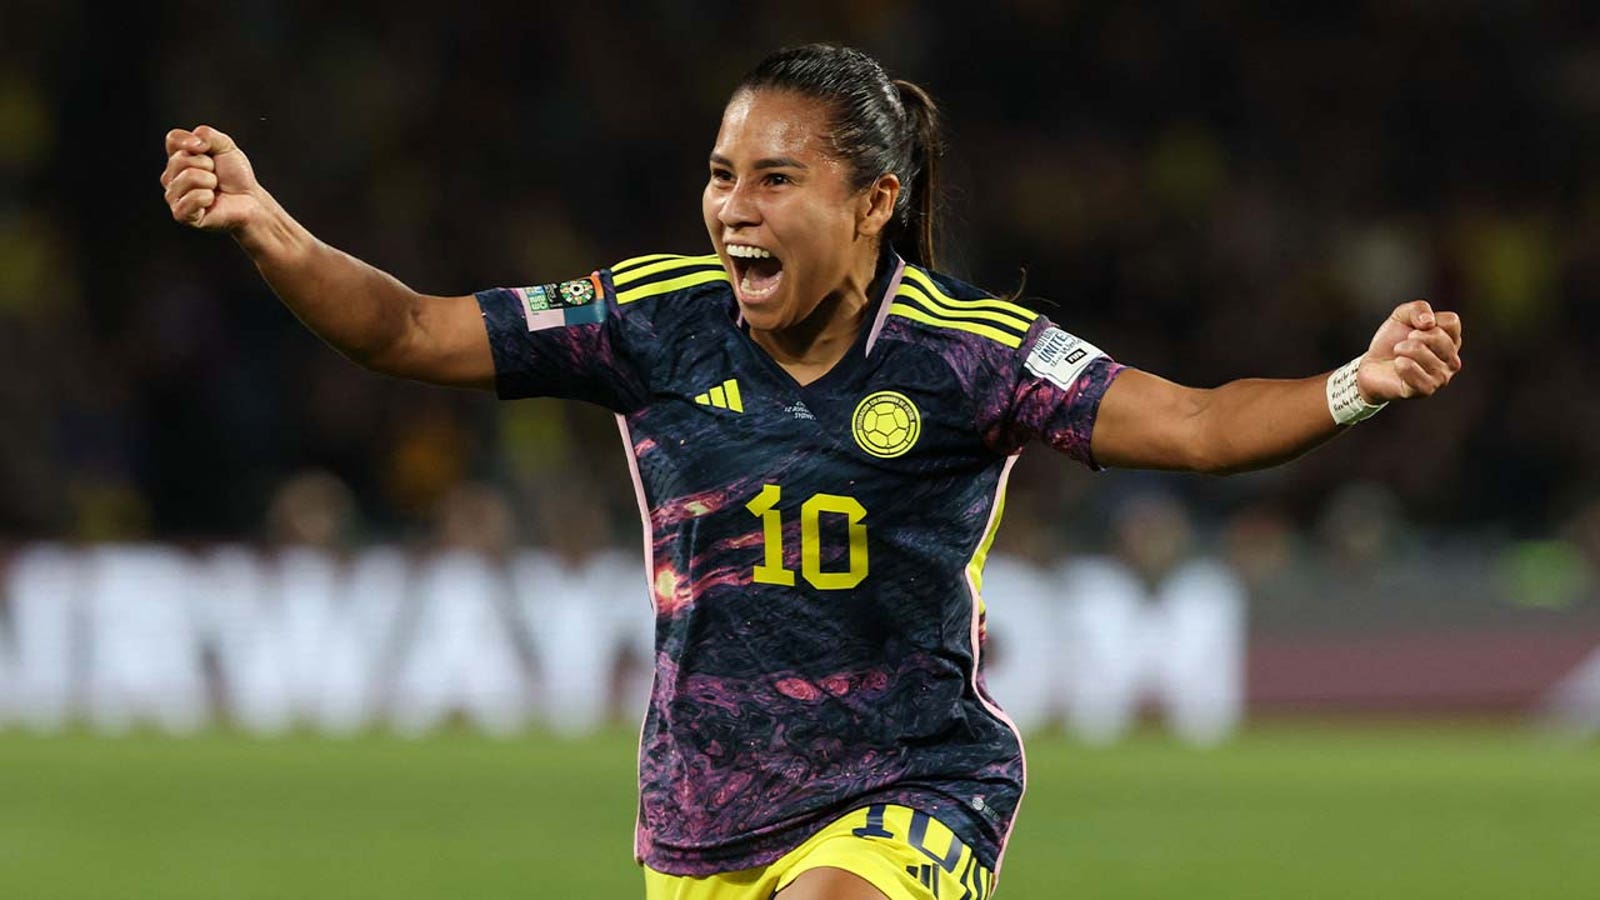 Colombia's Lisi Santos scores a goal against England in 44 minutes